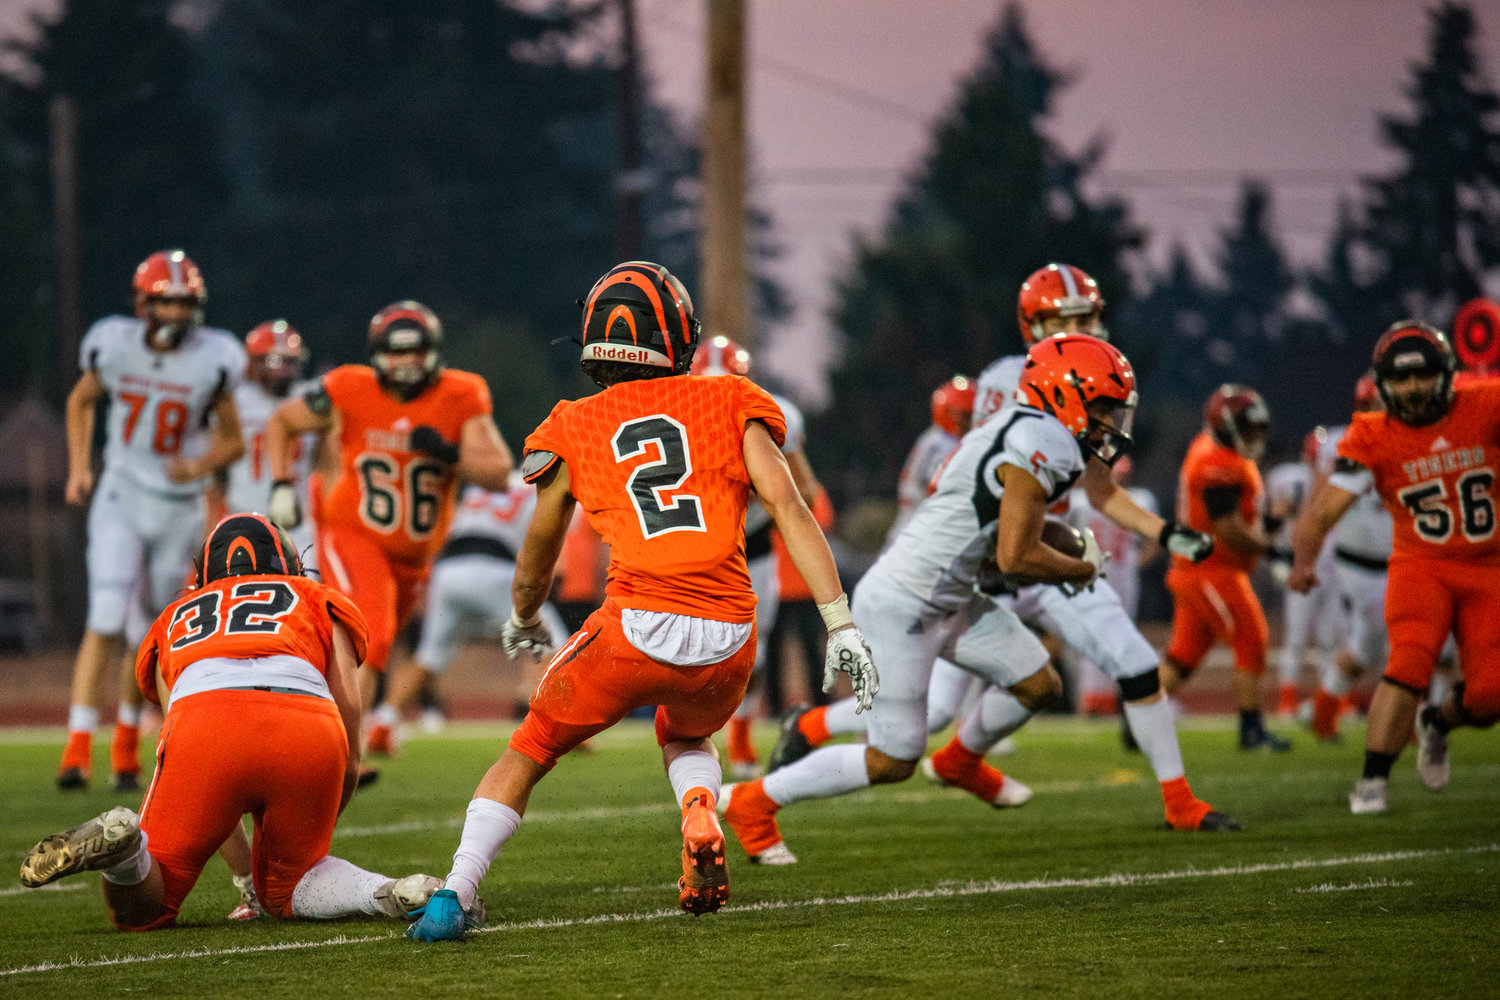 Centralia Tigers defensive back Cobain Kennedy prepares to make a tackle against Battle Ground in a home game Friday night.